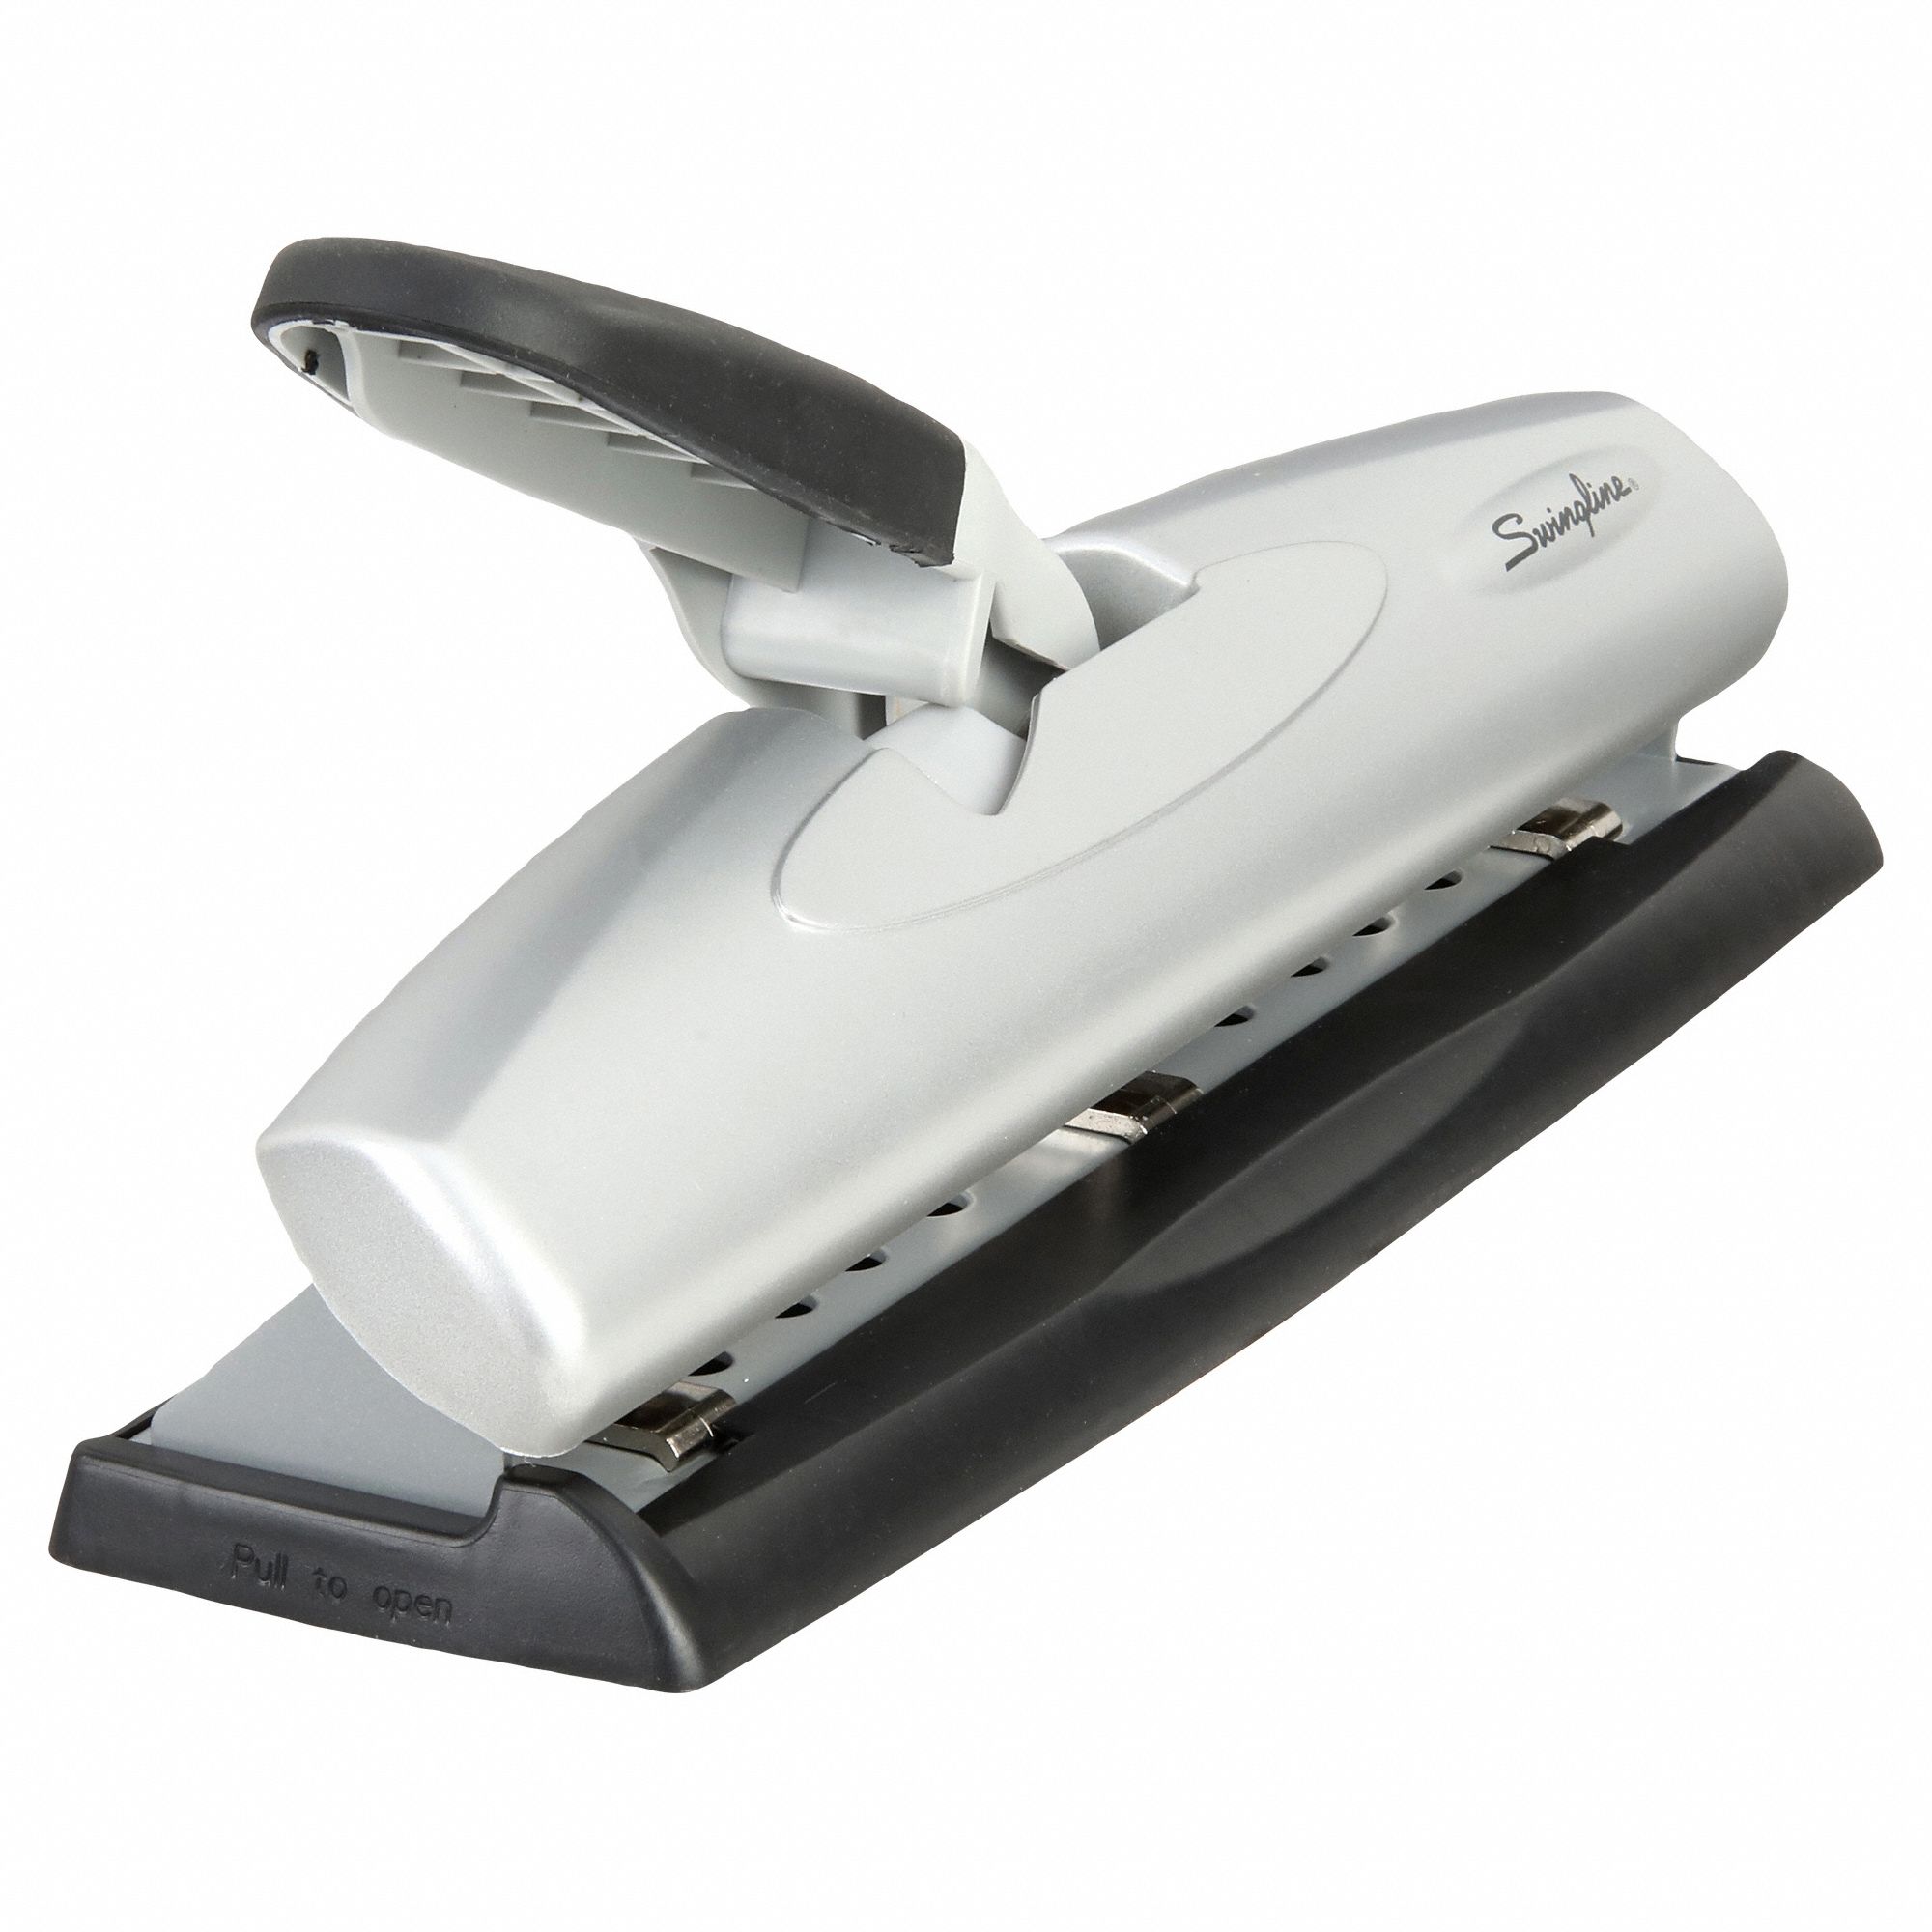 Swingline - Paper Punches; Type: 20 Sheet Three-Hole Punch; Hole Diameter:  0.2813 in; Features: Chip Tray Has a Flip Open Feature for Easy Disposal of  Paper Chips; Handle Locks Into a Closed